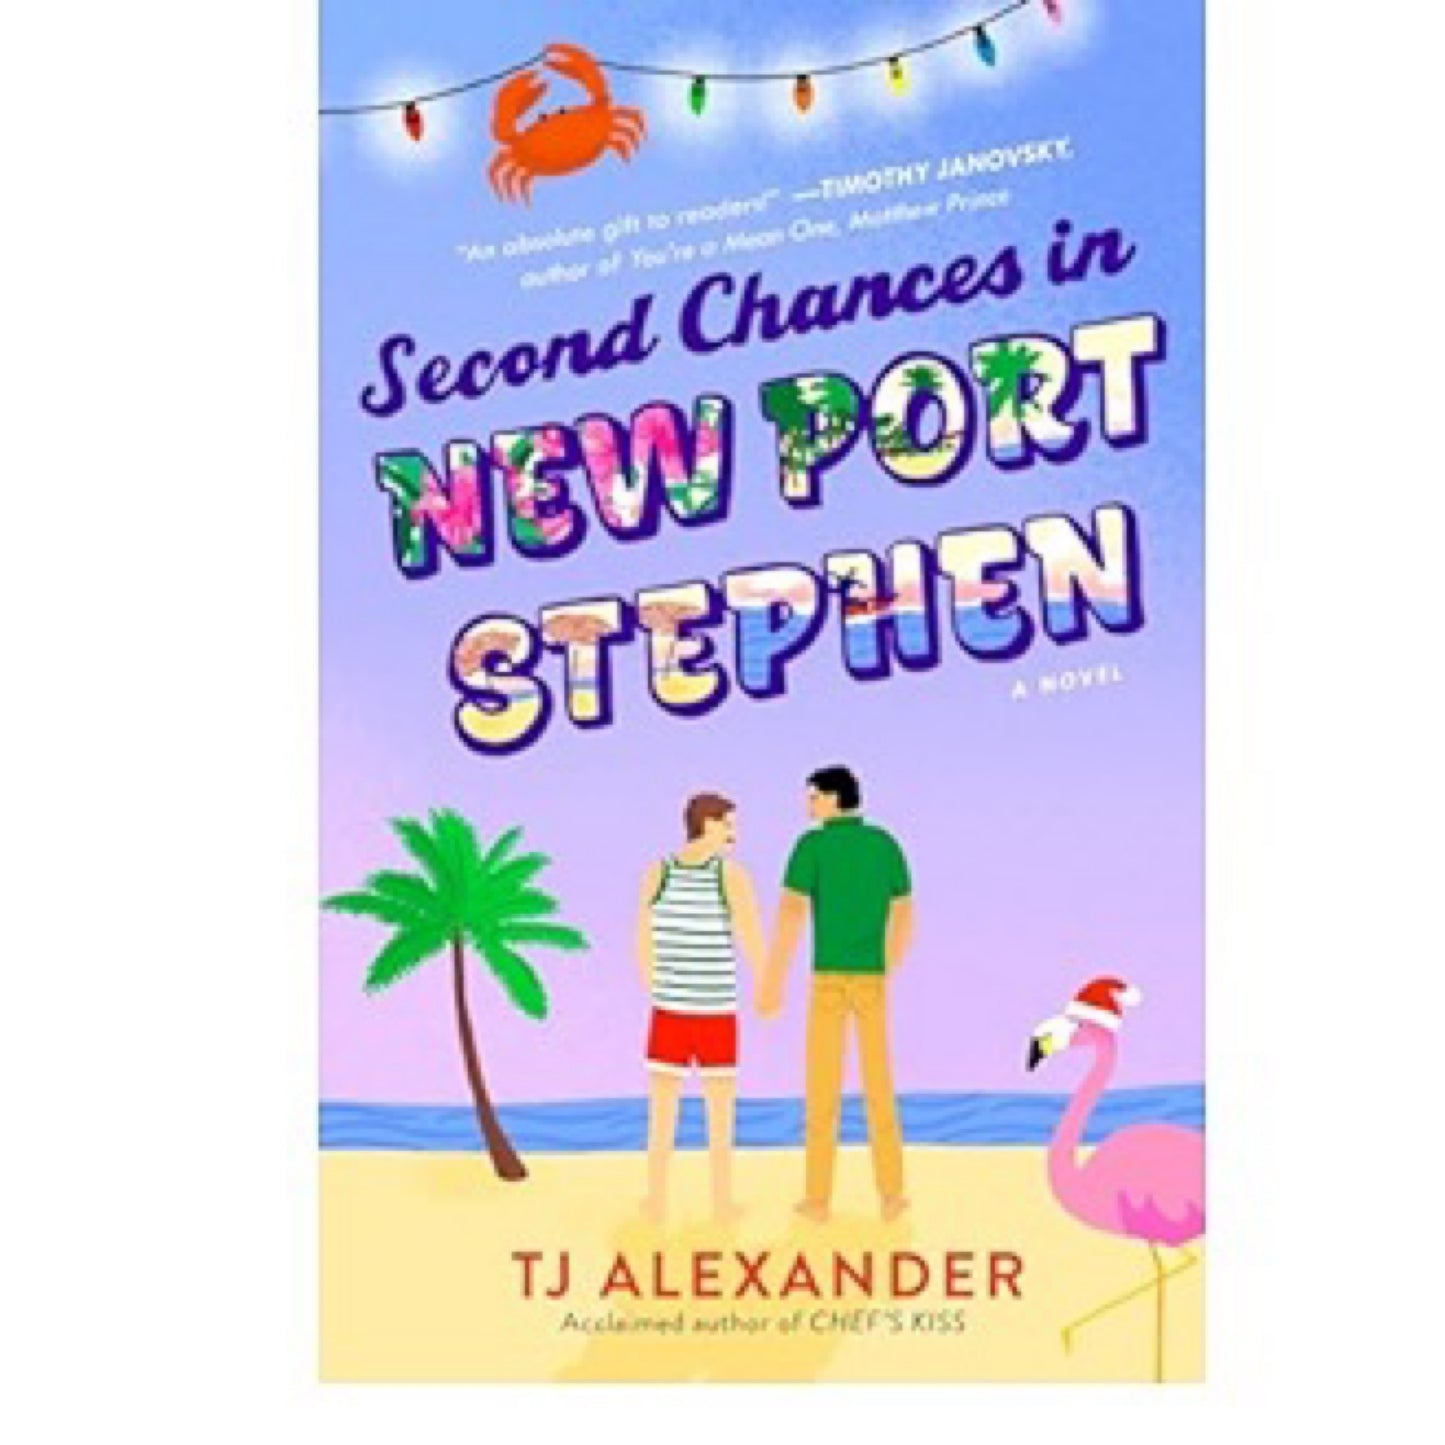 Second Chances in New Port Stephen by TJ Alexander (Paperback)